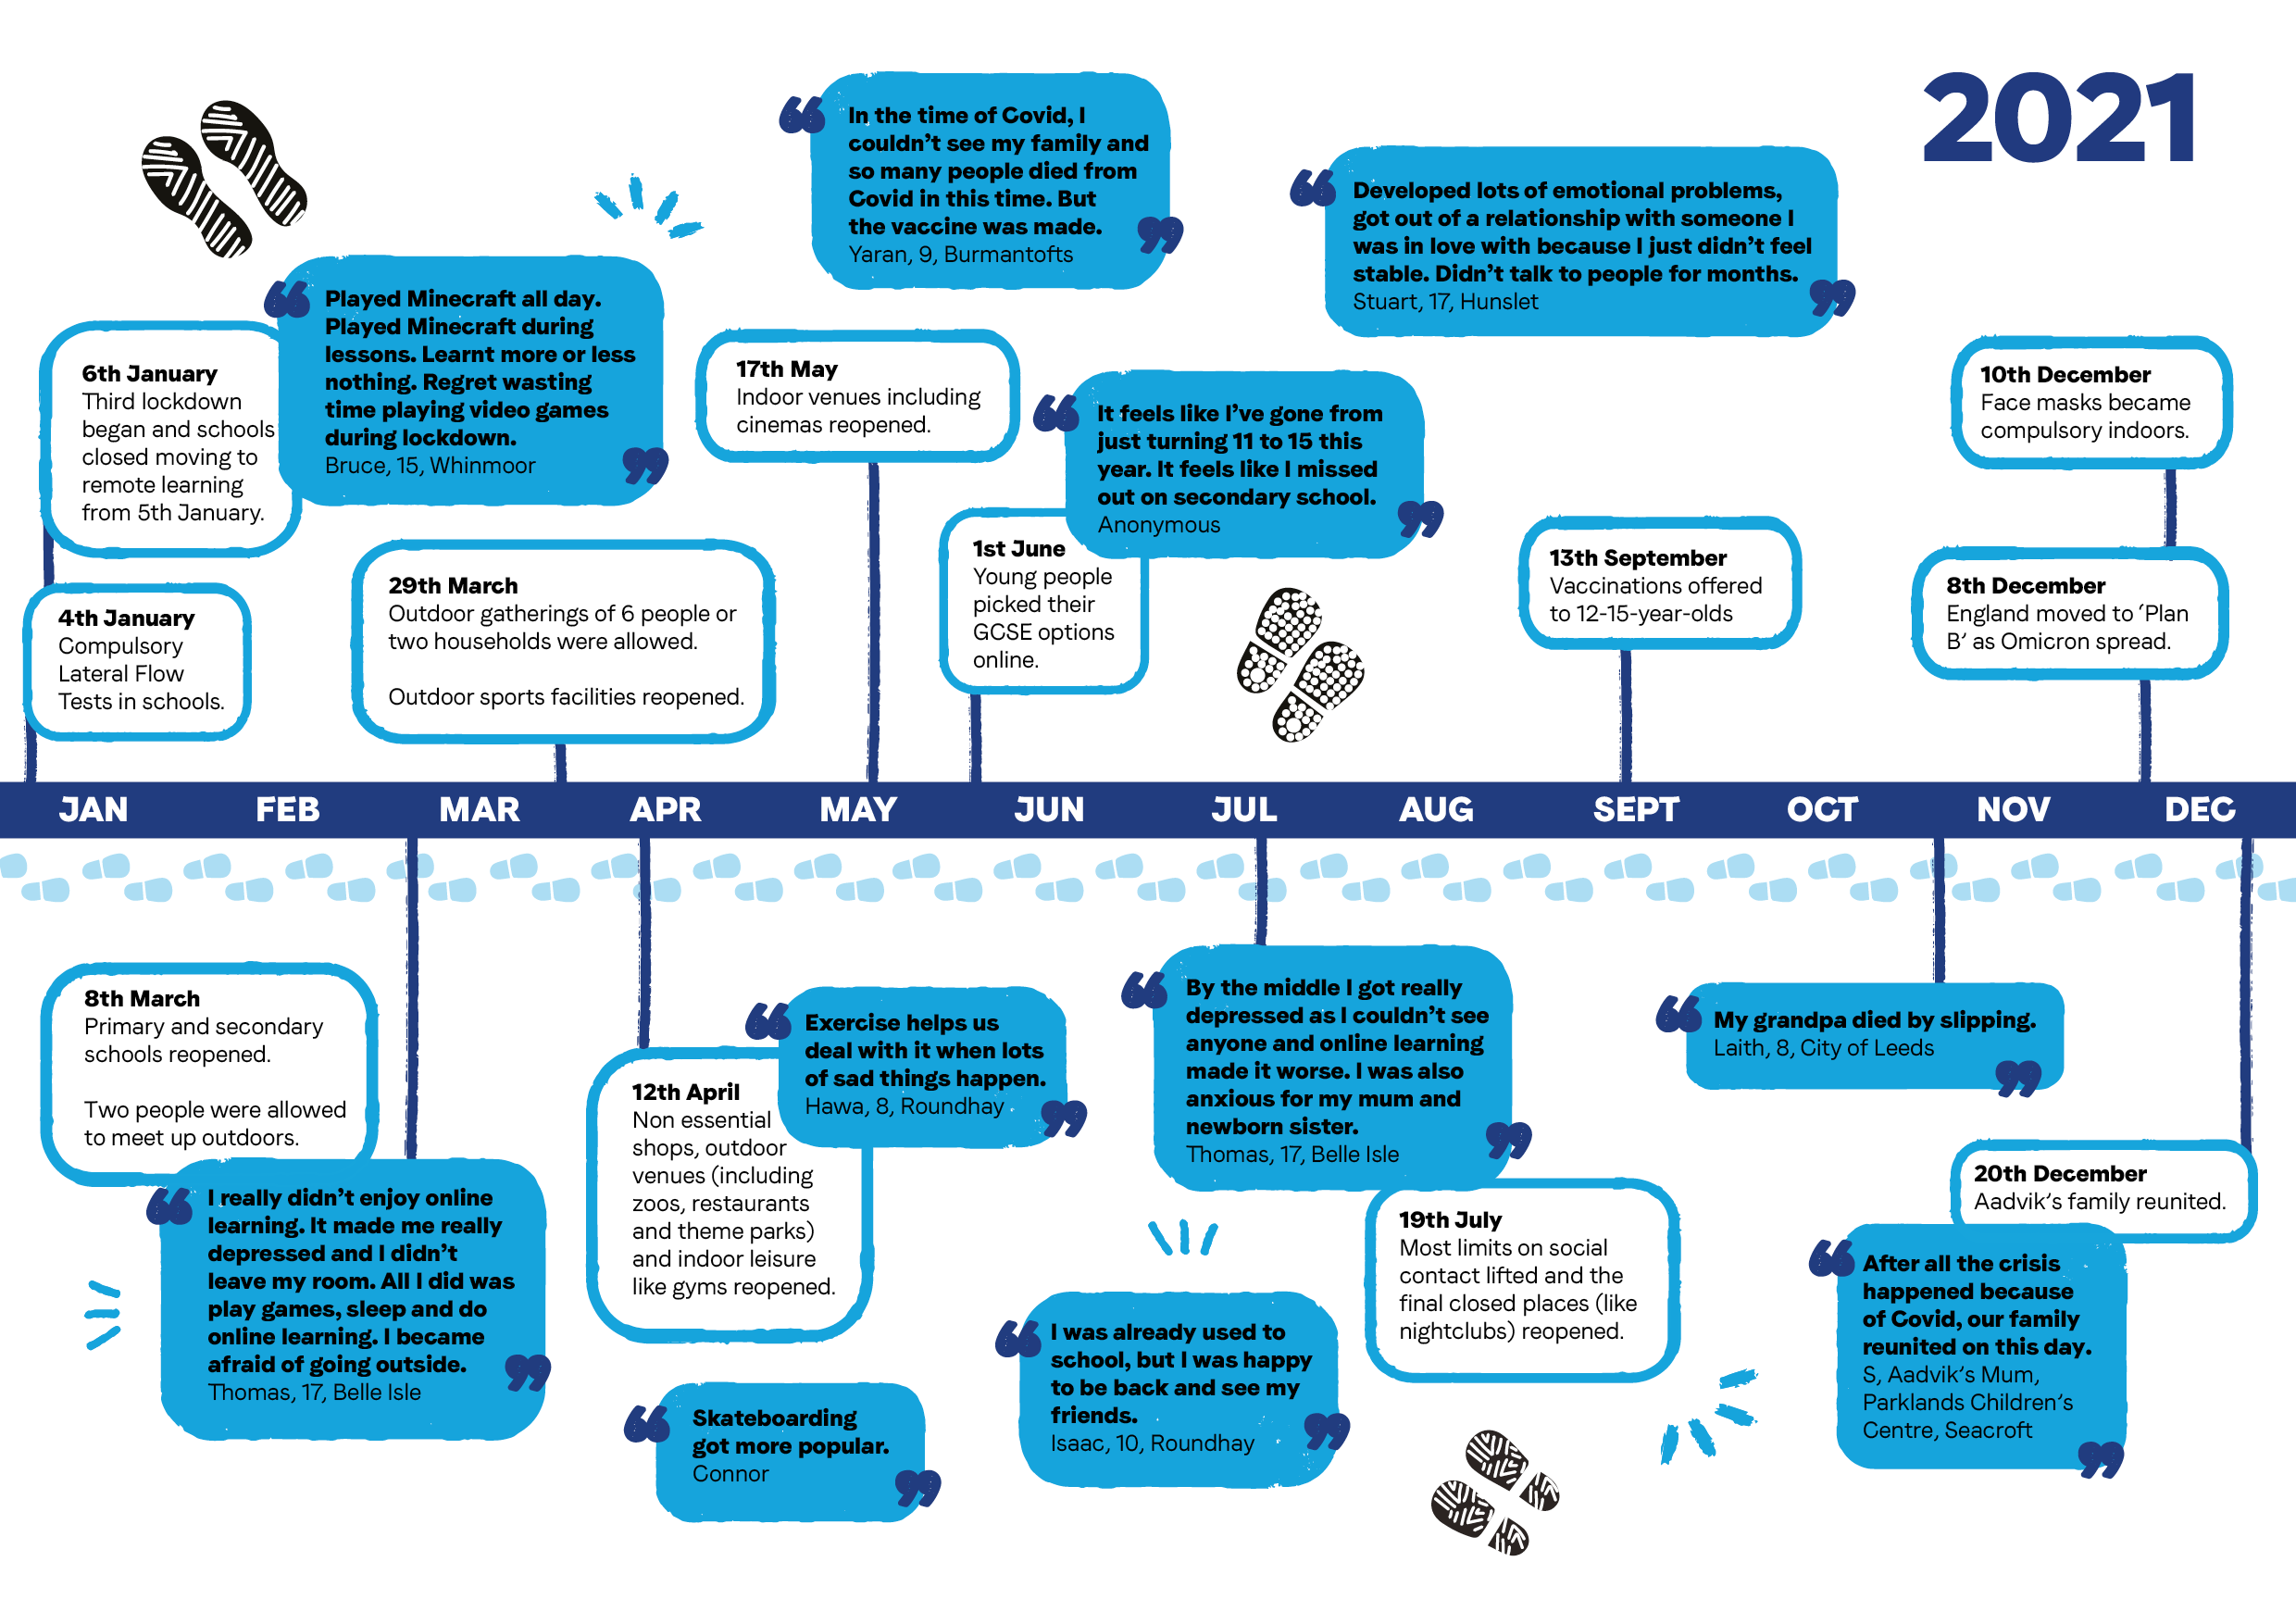 infographic showing the timeline of events in 2021 listed below